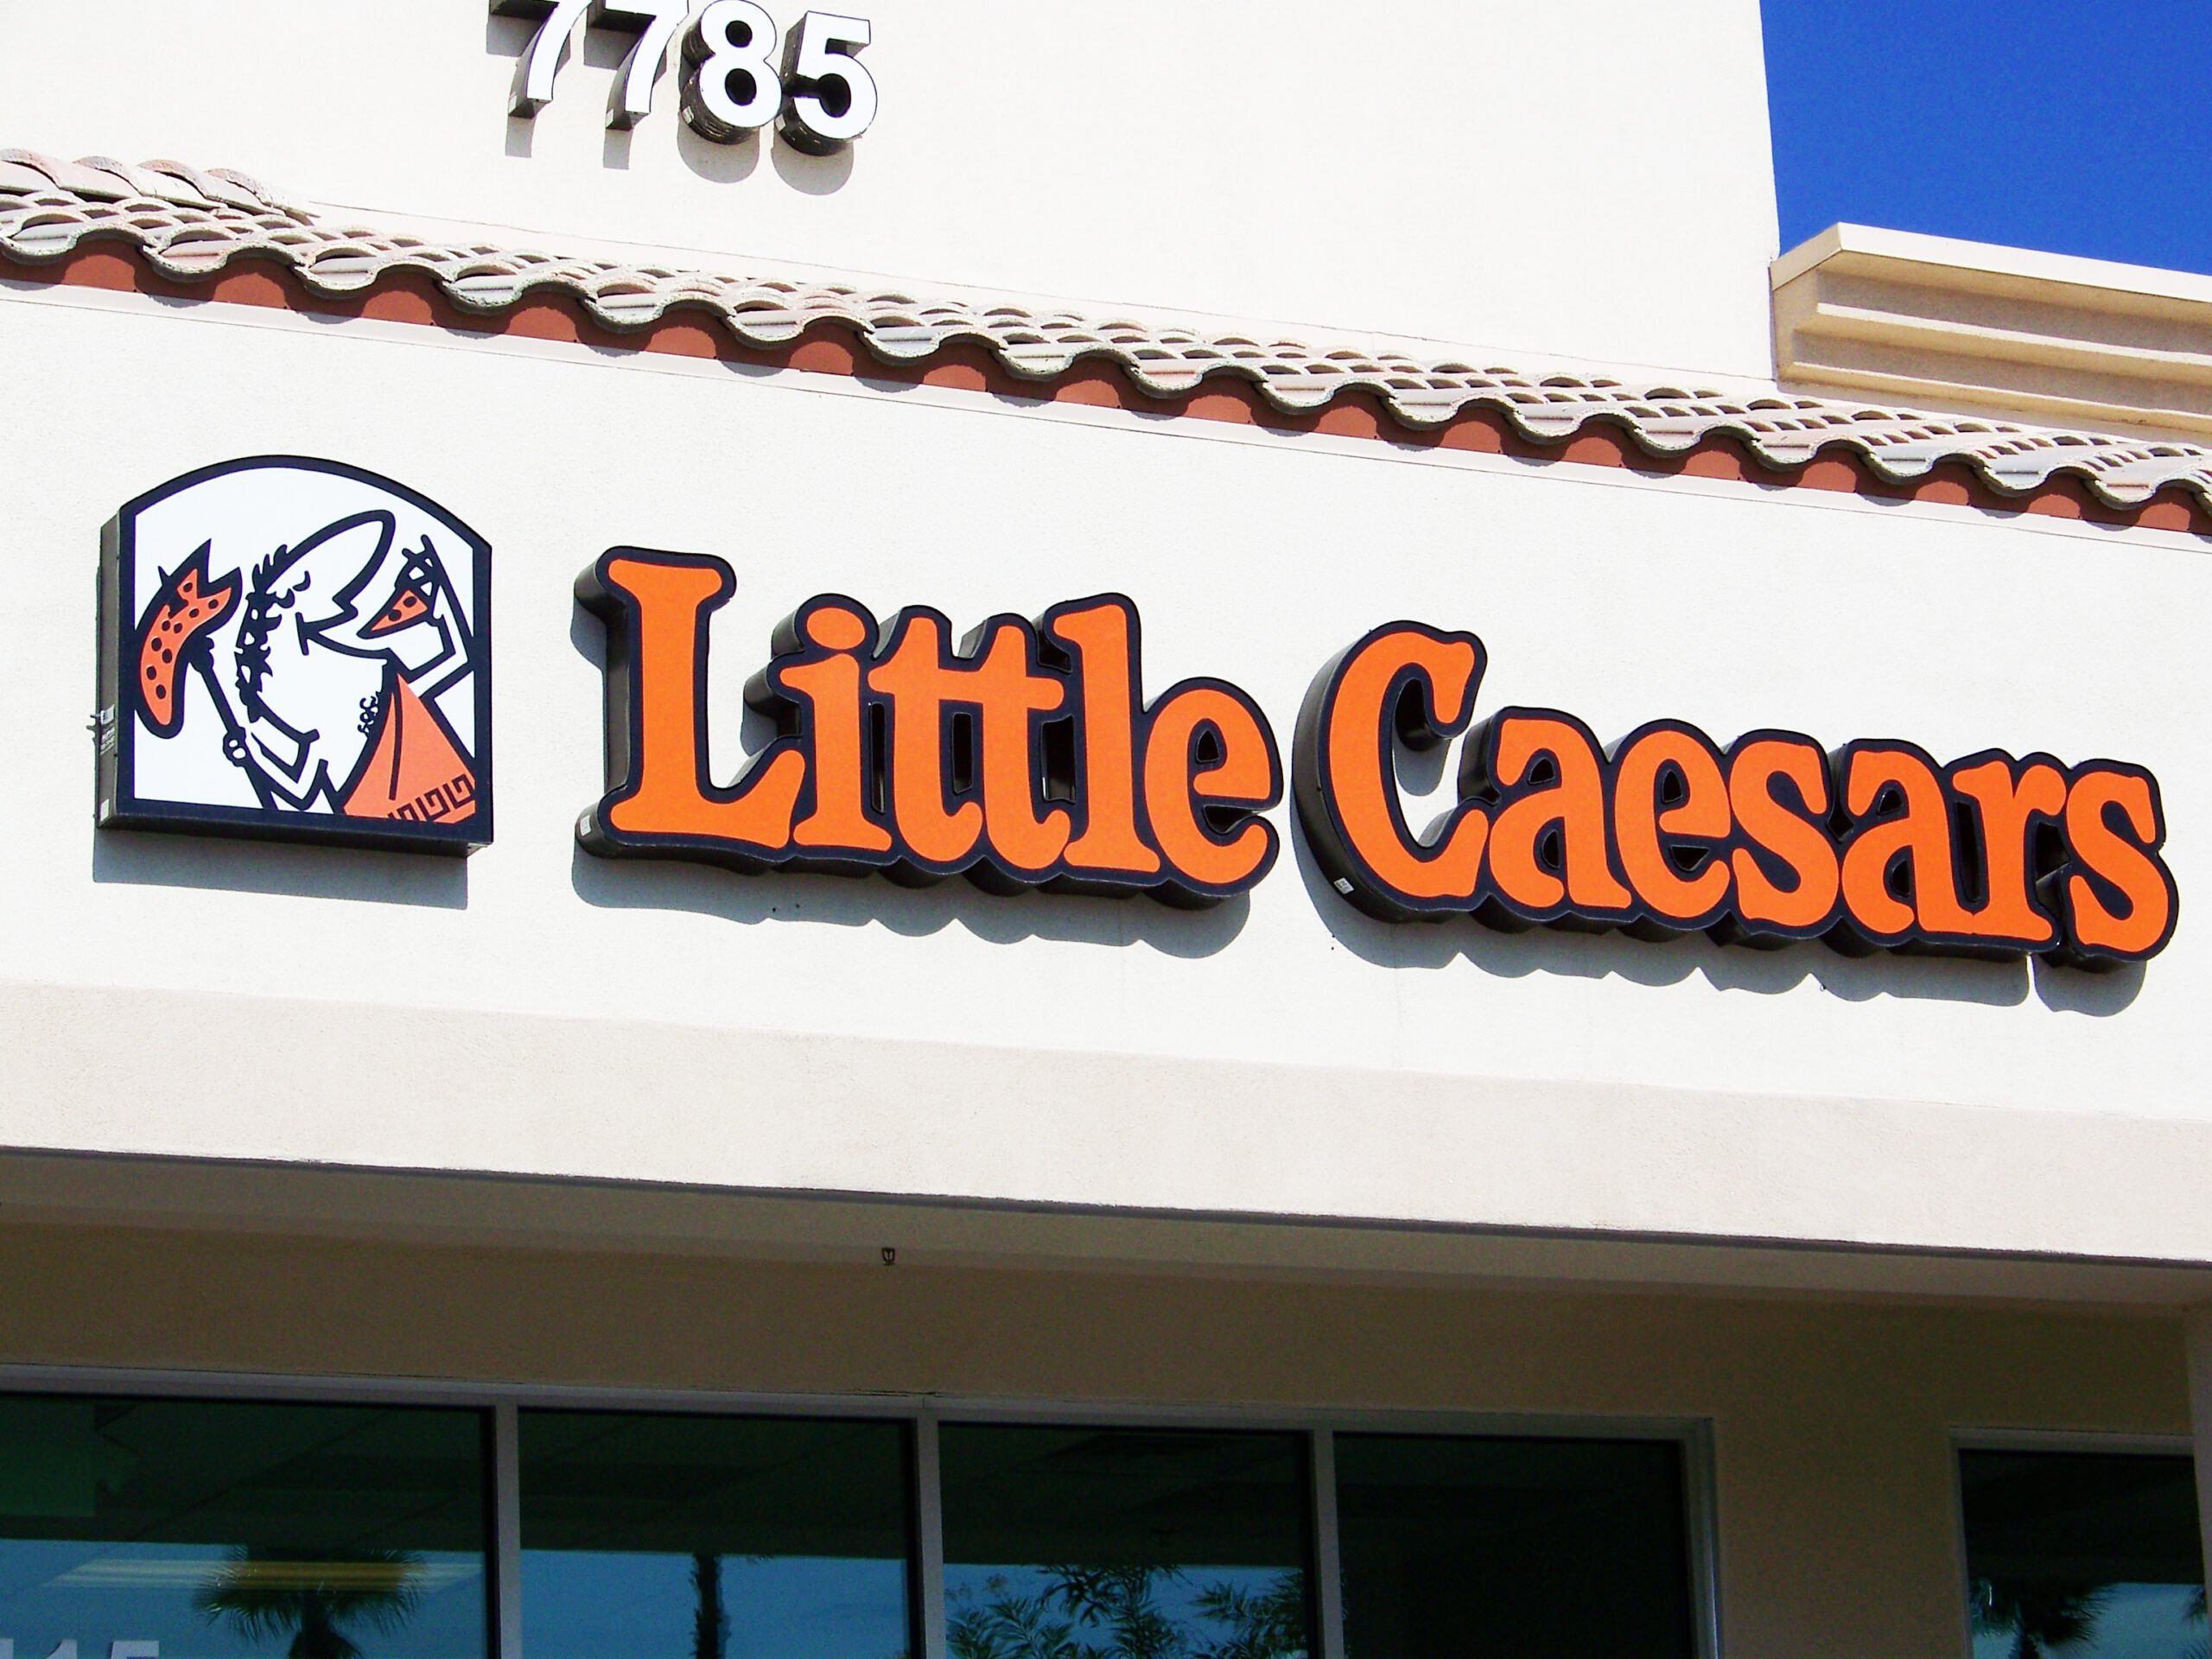 Little ceasers channel letter signs